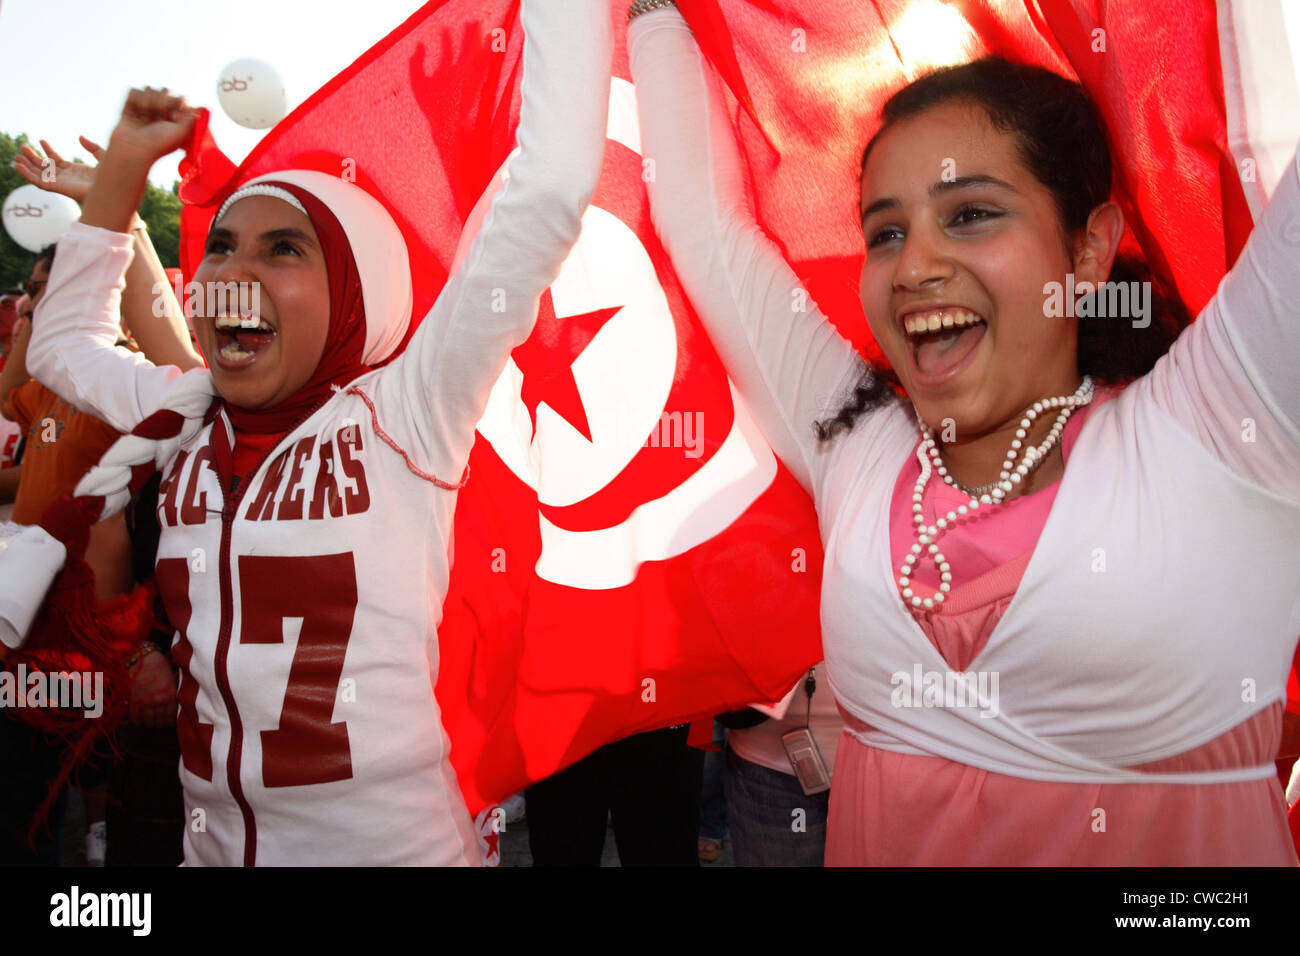 Soccer fans World Cup 2006: Cheering girl with Tunisian flag Stock Photo